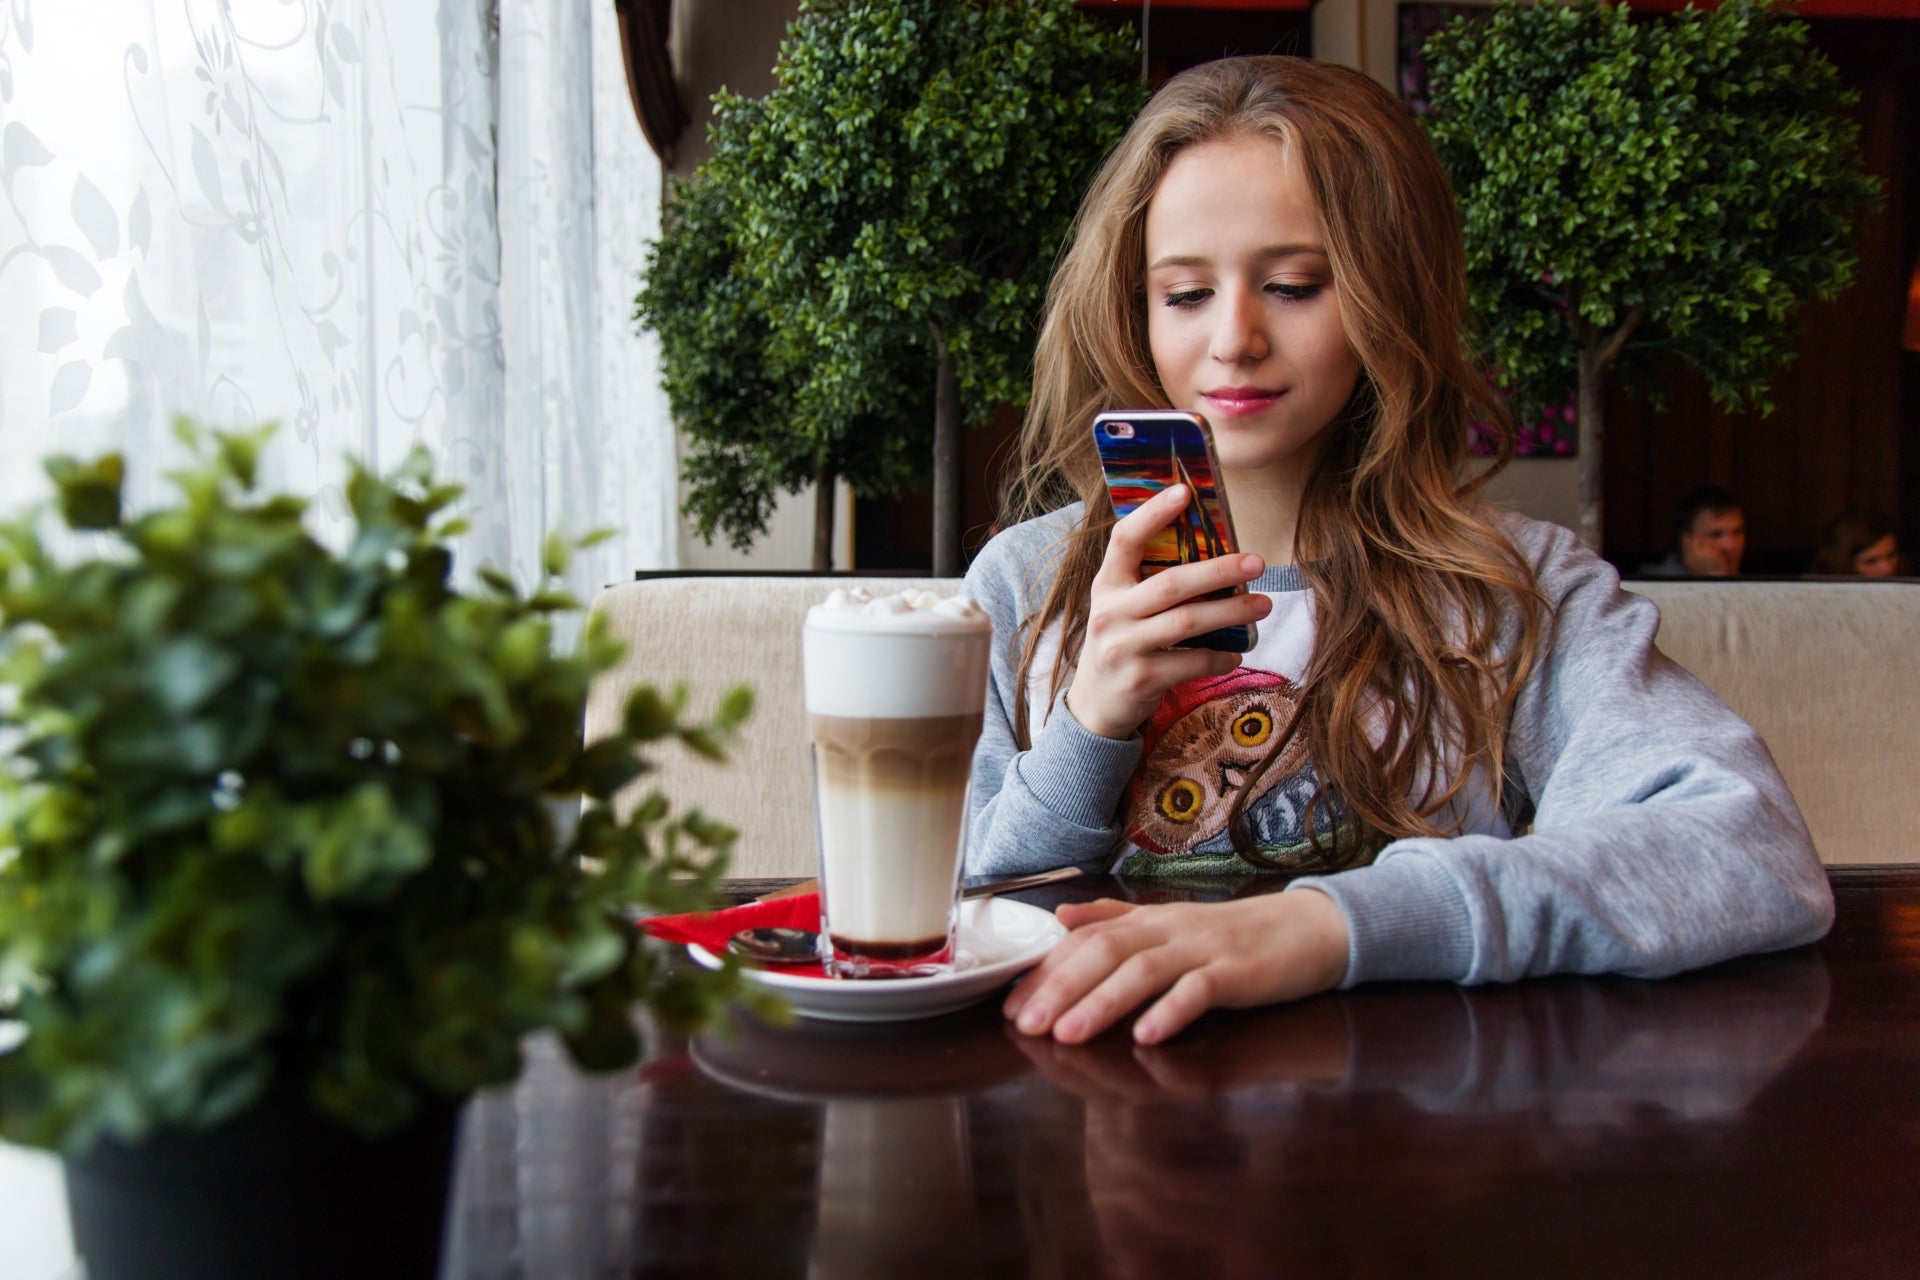 A young woman in a restaurant looks at her cell phone. She is sitting at a table with a milkshake in front of her, and there is greenery around her.